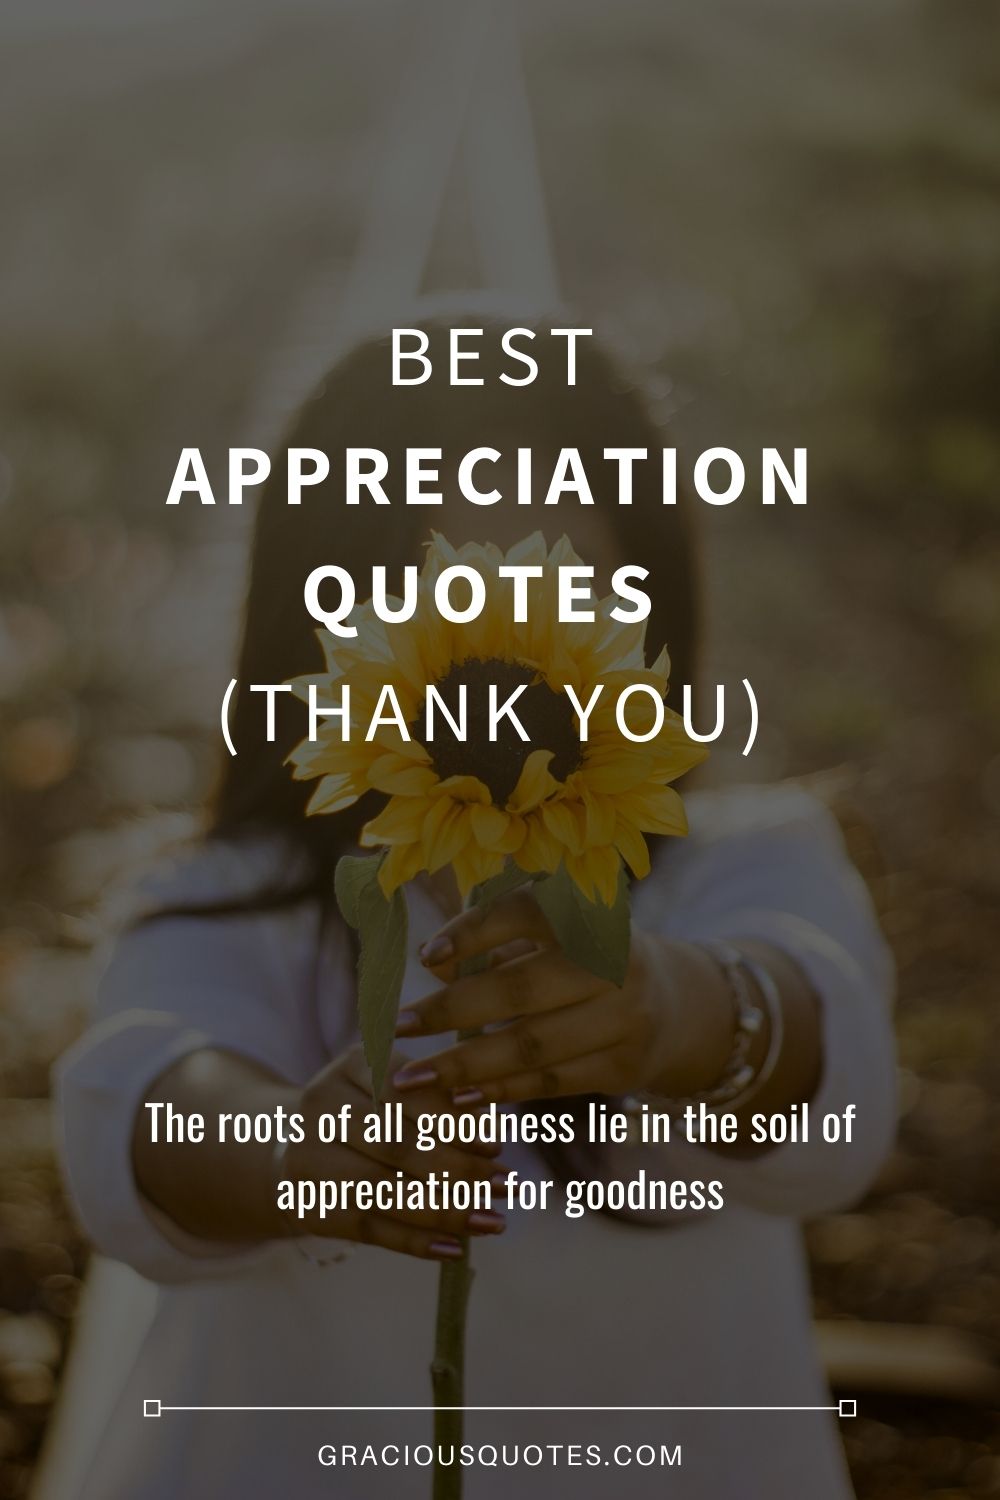 Best Appreciation Quotes (THANK YOU) - Gracious Quotes